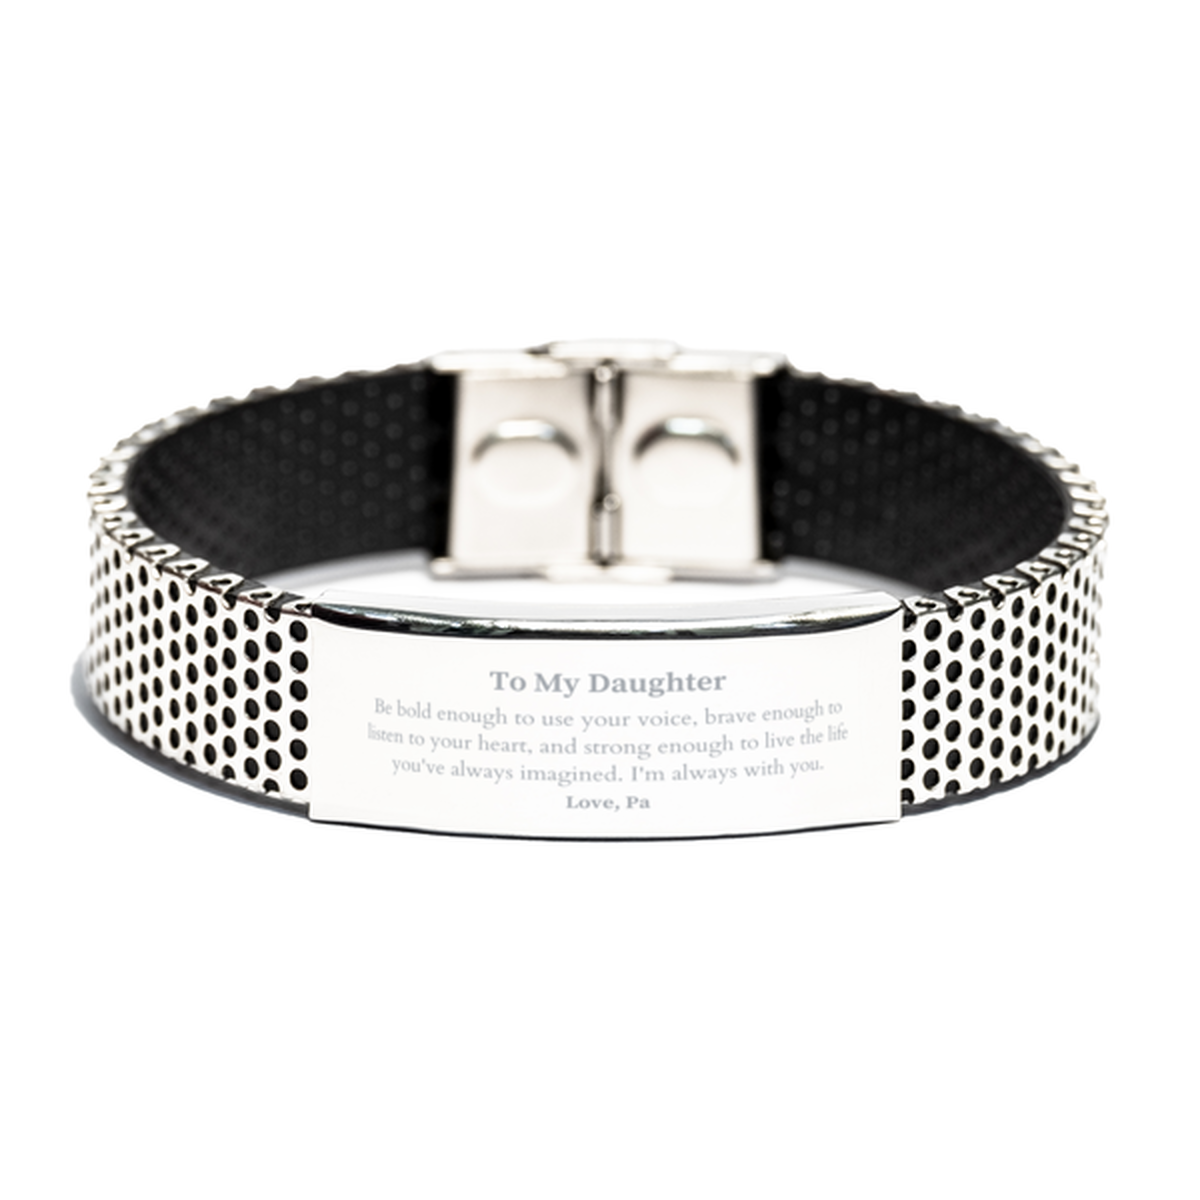 Keepsake Daughter Stainless Steel Bracelet Gift Idea Graduation Christmas Birthday Daughter from Pa, Daughter Be bold enough to use your voice, brave enough to listen to your heart. Love, Pa